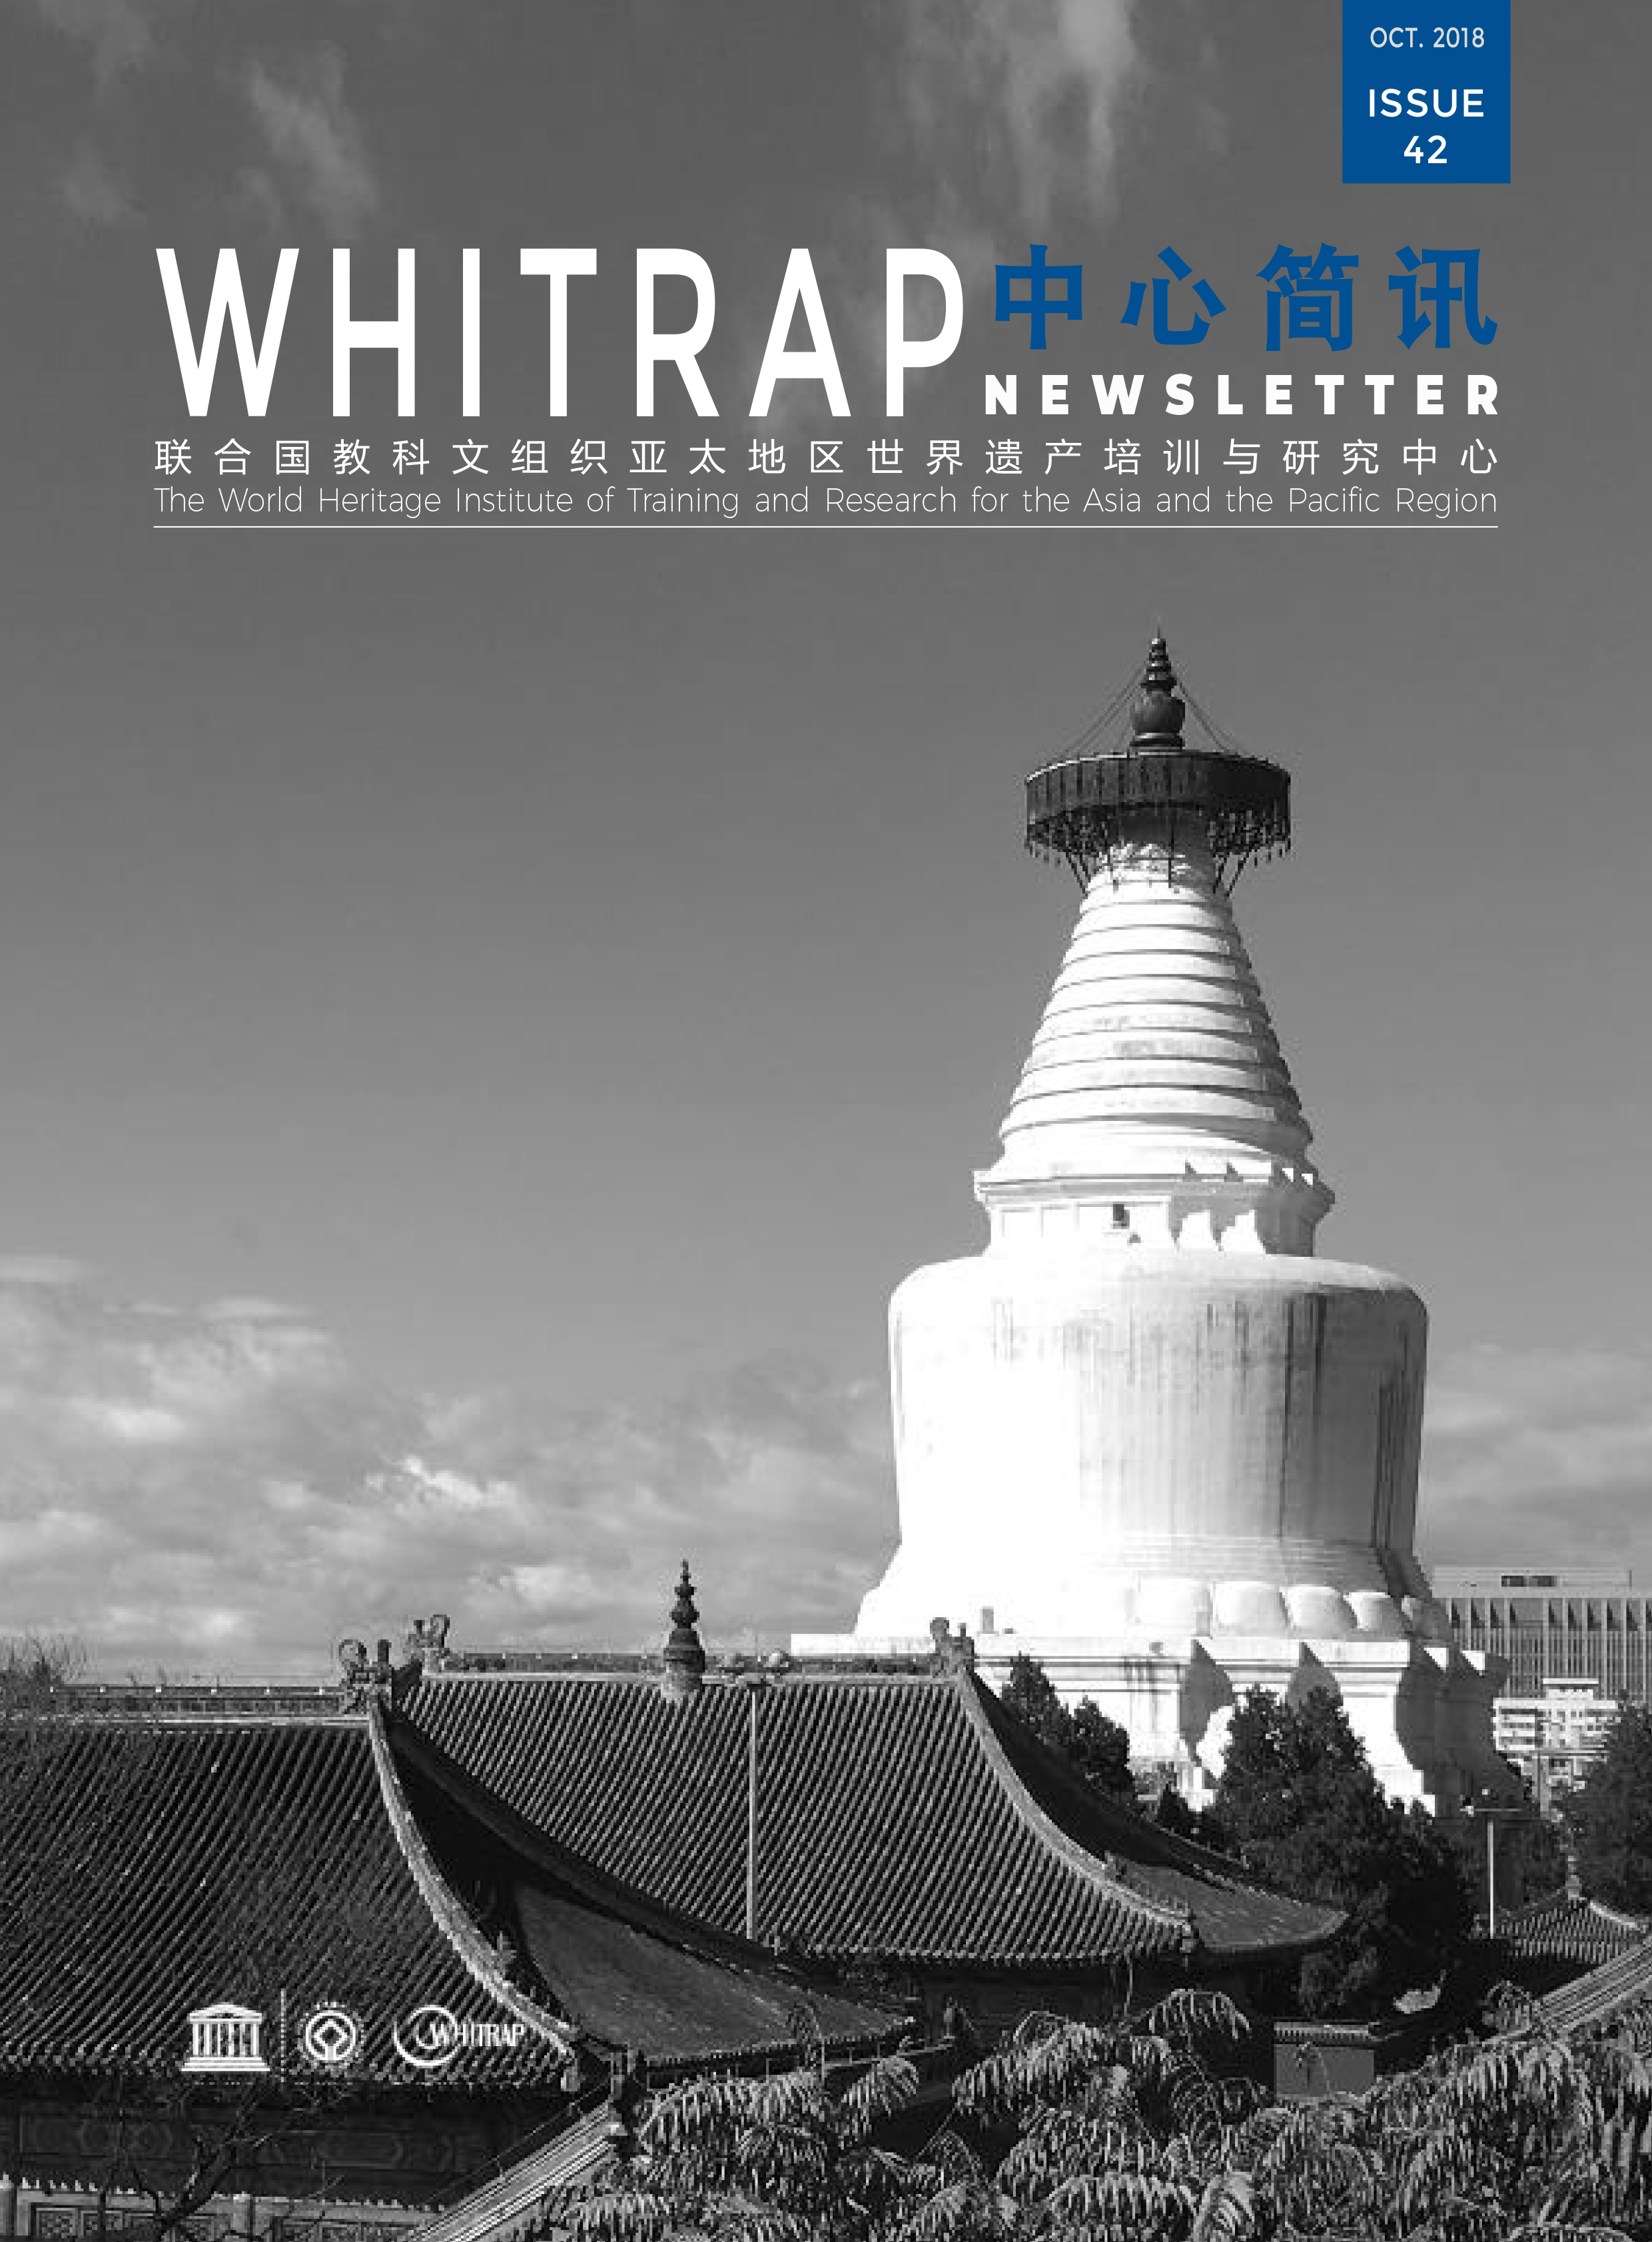 WHITRAP Newsletter (Issue 42)